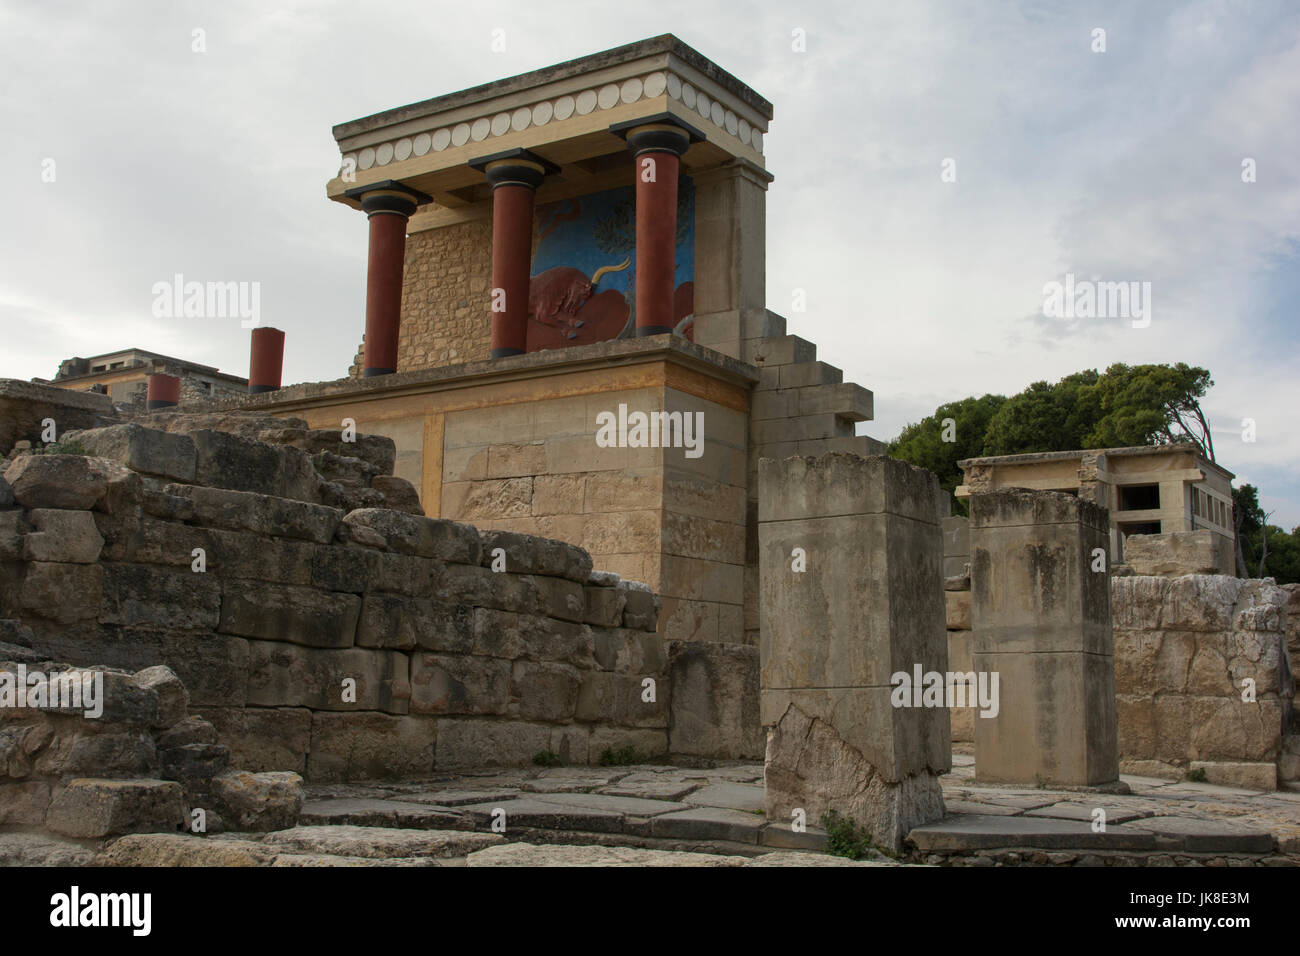 The northern entrance of the Palace of Knossos with the charging bull frescoe.This palace was the centre of the Minoan civilization and culture. Stock Photo